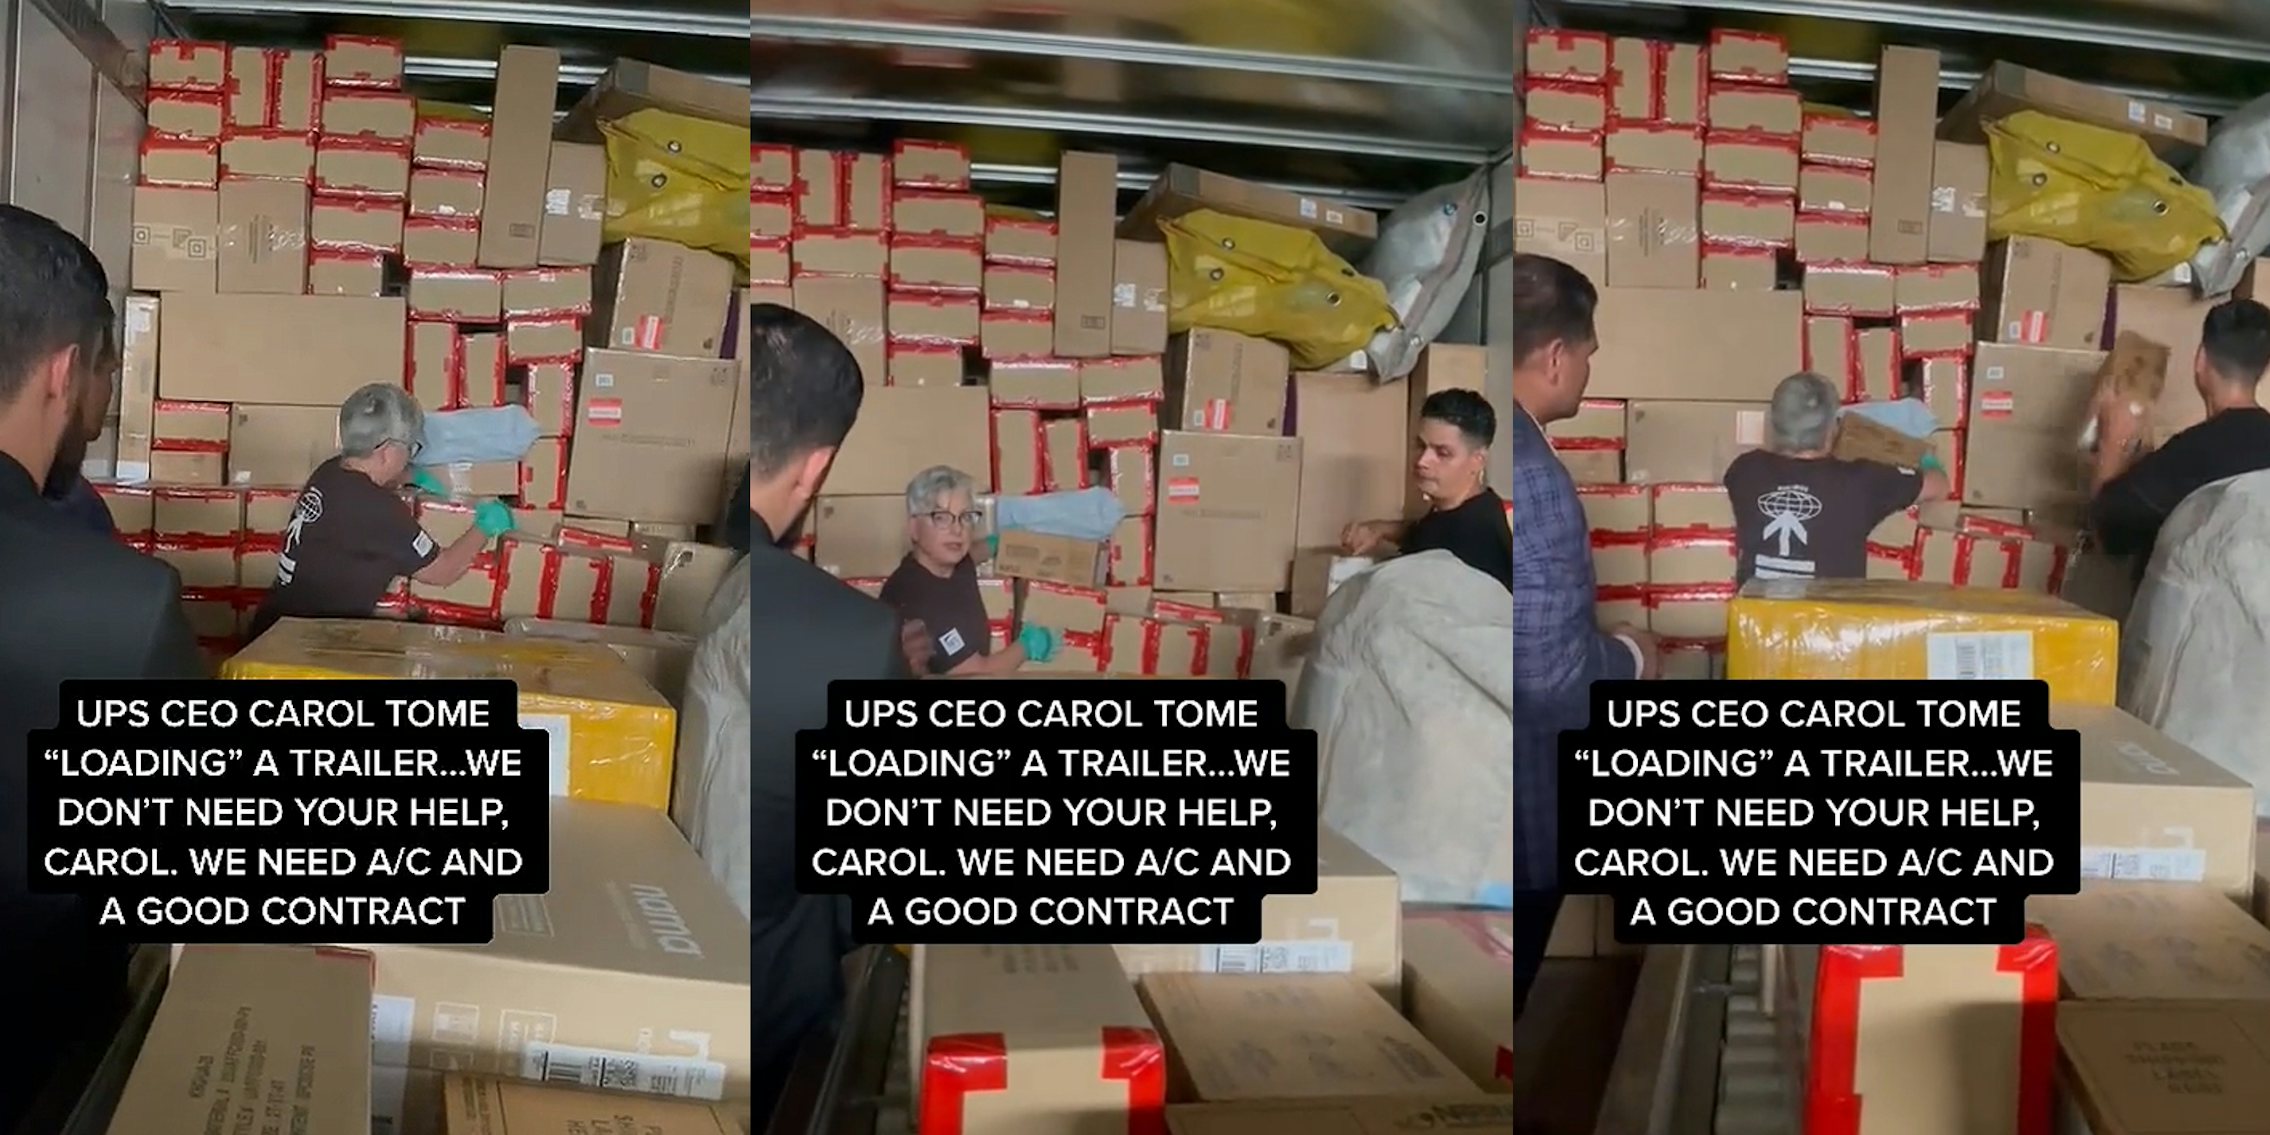 UPS workers loading trailer with CEO caption 'UPS CEO CAROL TOME 'LOADING' A TRAILER... WE DON'T NEED YOUR HELP, CAROL. WE NEED A/C AND A GOOD CONTRACT' (l) UPS workers loading trailer with CEO caption 'UPS CEO CAROL TOME 'LOADING' A TRAILER... WE DON'T NEED YOUR HELP, CAROL. WE NEED A/C AND A GOOD CONTRACT' (c) UPS workers loading trailer with CEO caption 'UPS CEO CAROL TOME 'LOADING' A TRAILER... WE DON'T NEED YOUR HELP, CAROL. WE NEED A/C AND A GOOD CONTRACT' (r)